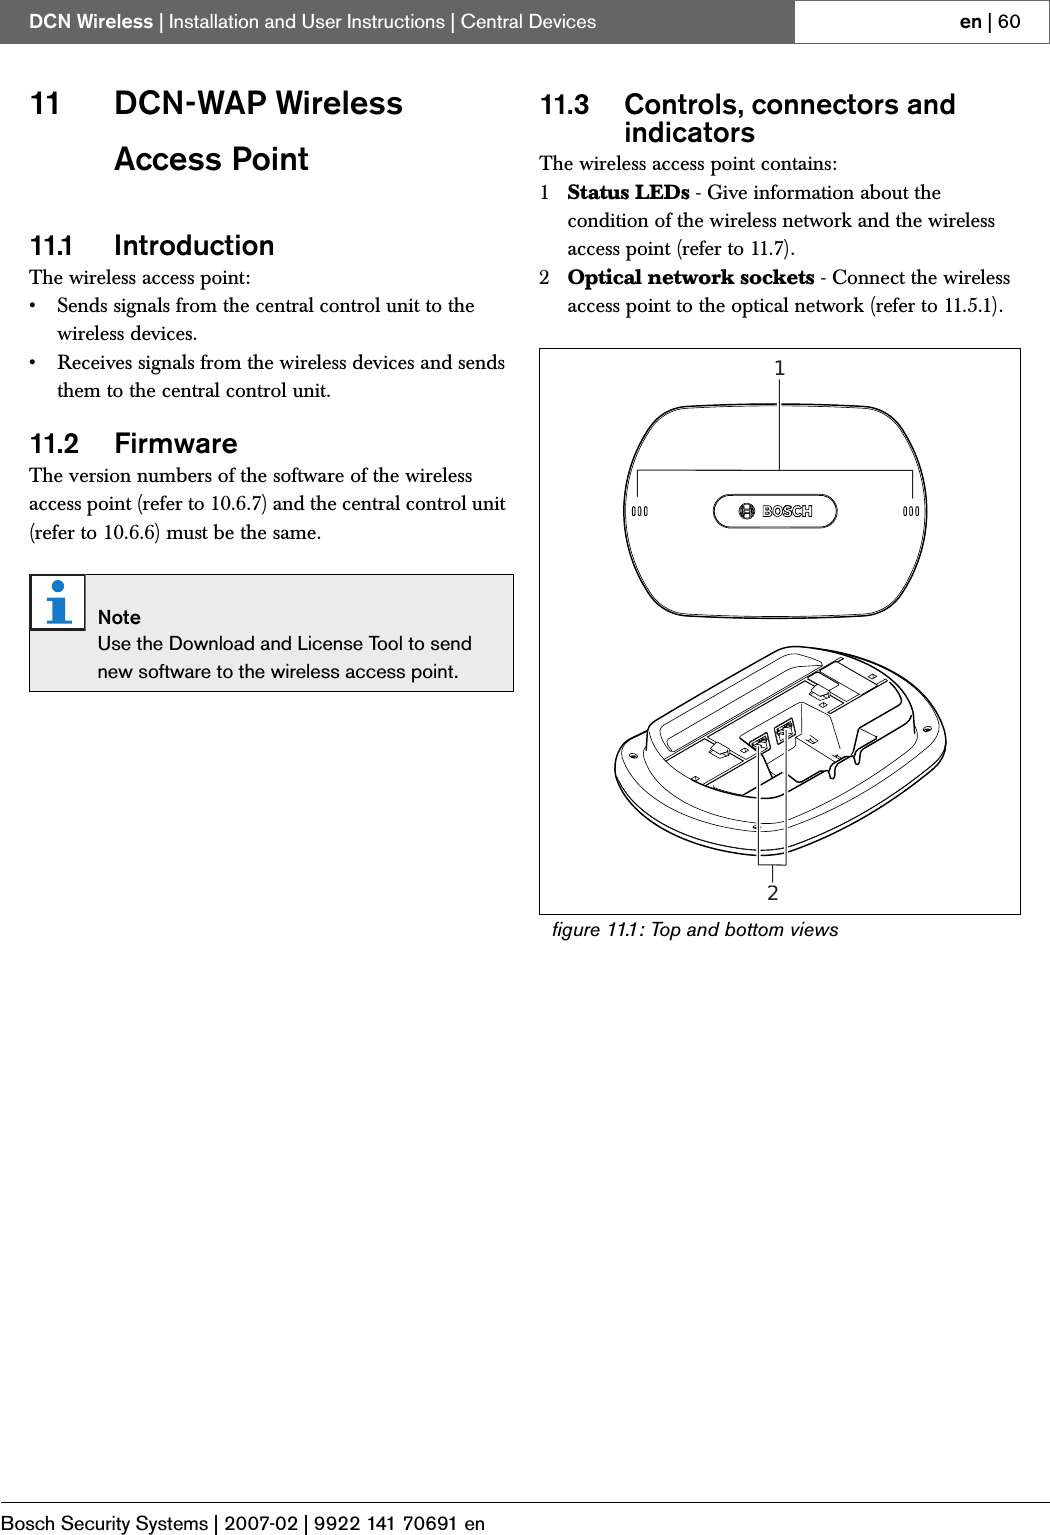 Page 31 of Bosch Security Systems DCNWAP Wireless Access Point User Manual Part 2